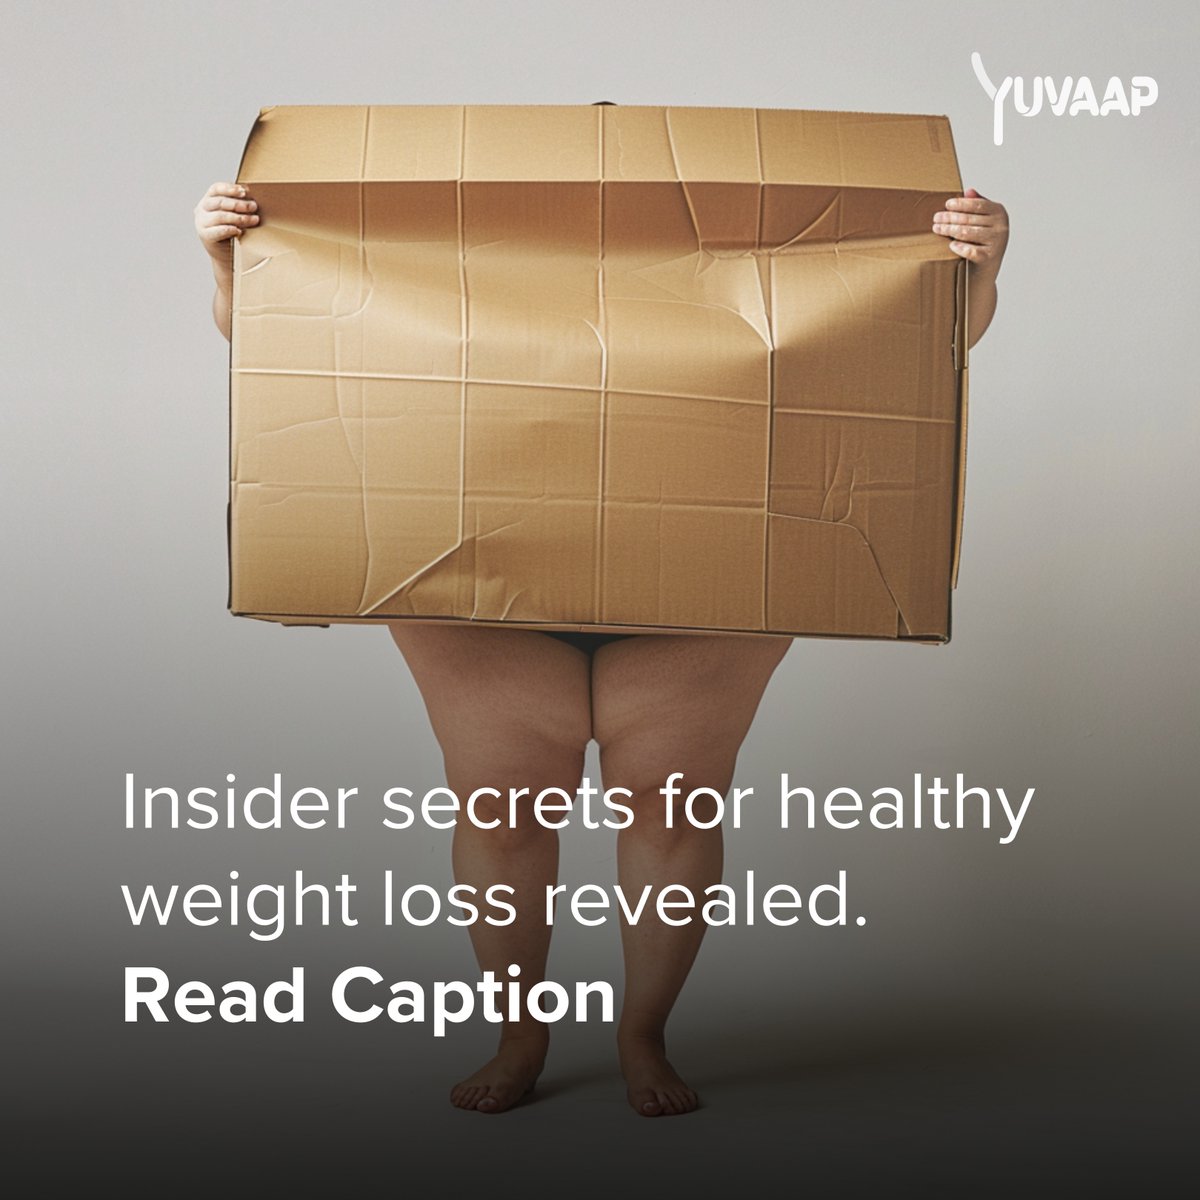 Discover the insider secrets to healthy weight loss! From nutrition tips to workout hacks, we've got you covered. Say hello to a fitter, happier you!

#yuvaap #findyoury #calories #weightloss #weightlossjourney #fitness #healthylifestyle #healthyeating  #motivation